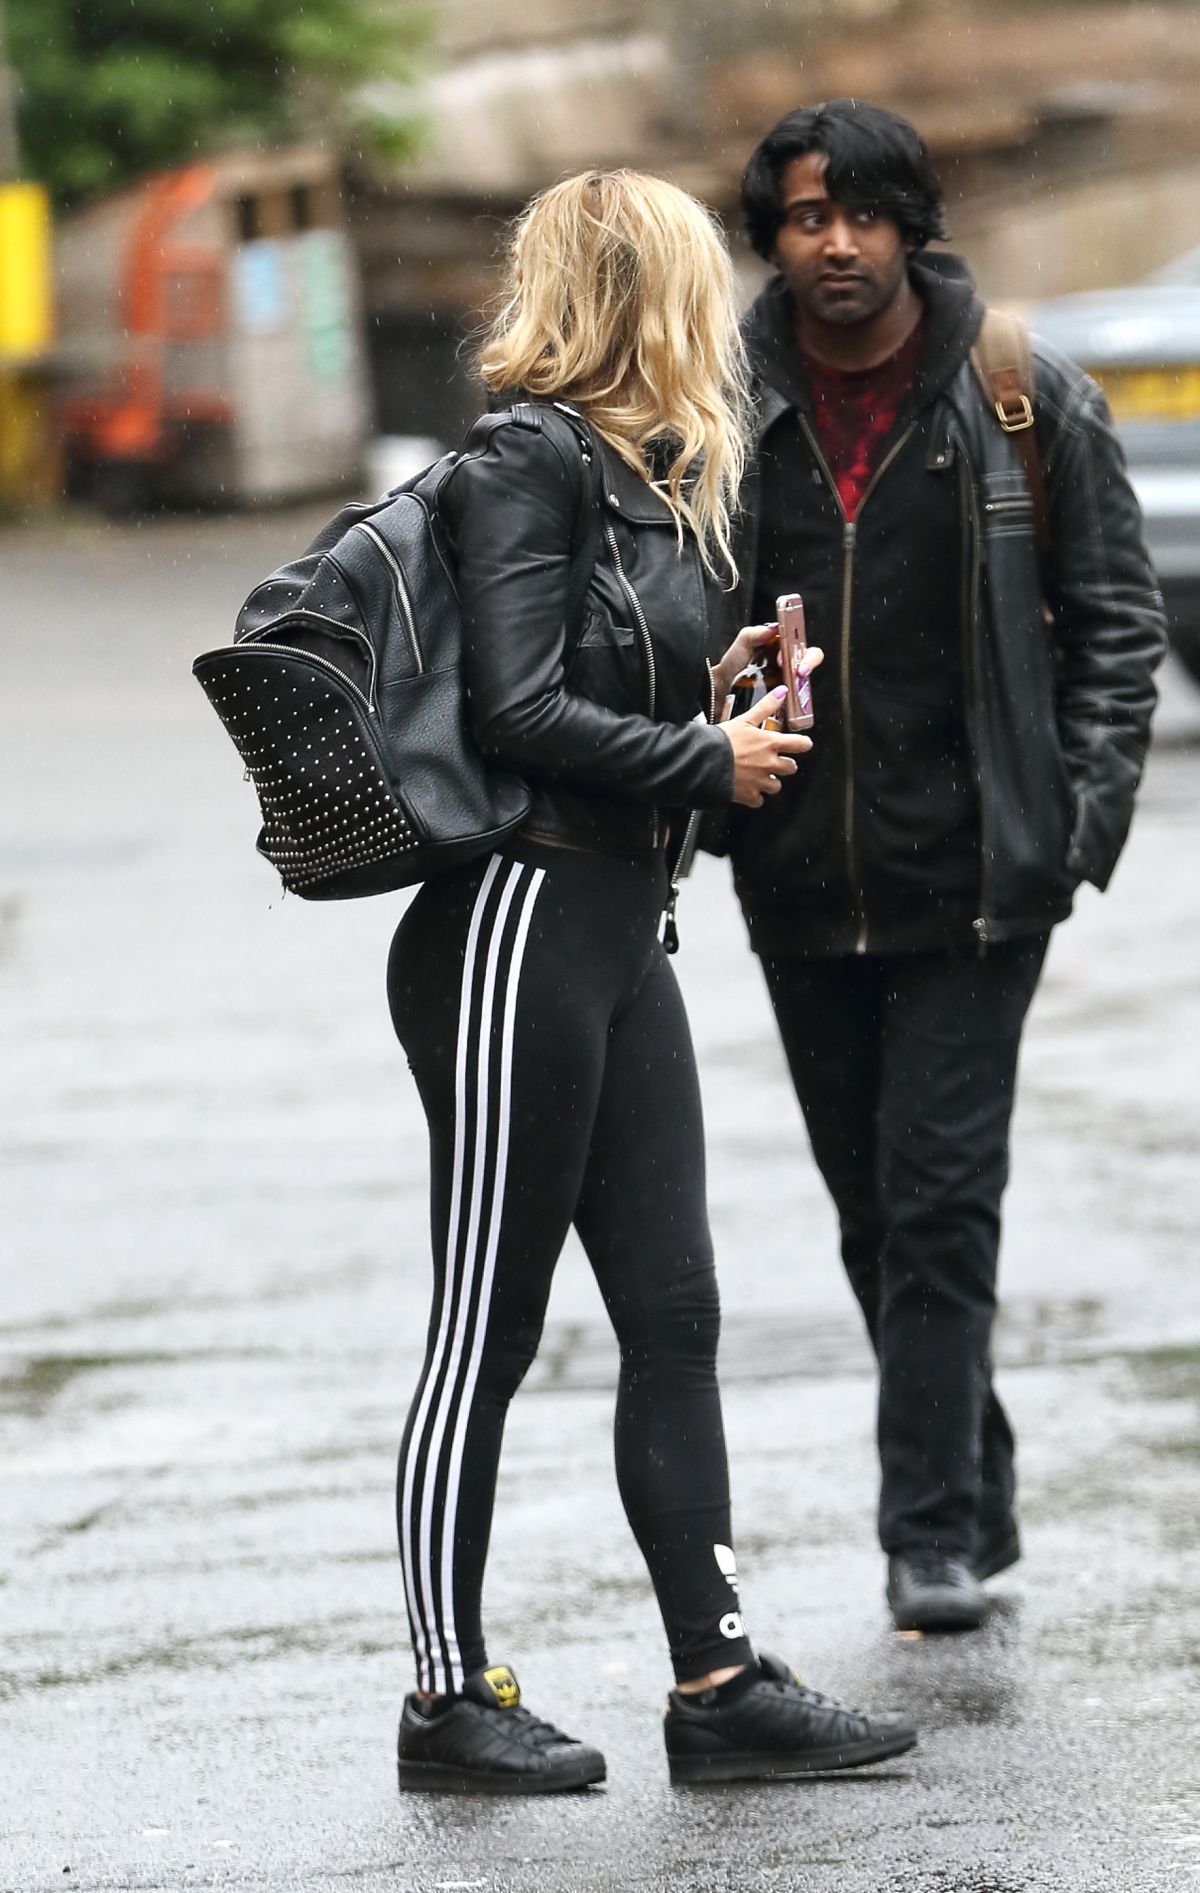 Ashley James out and about in London